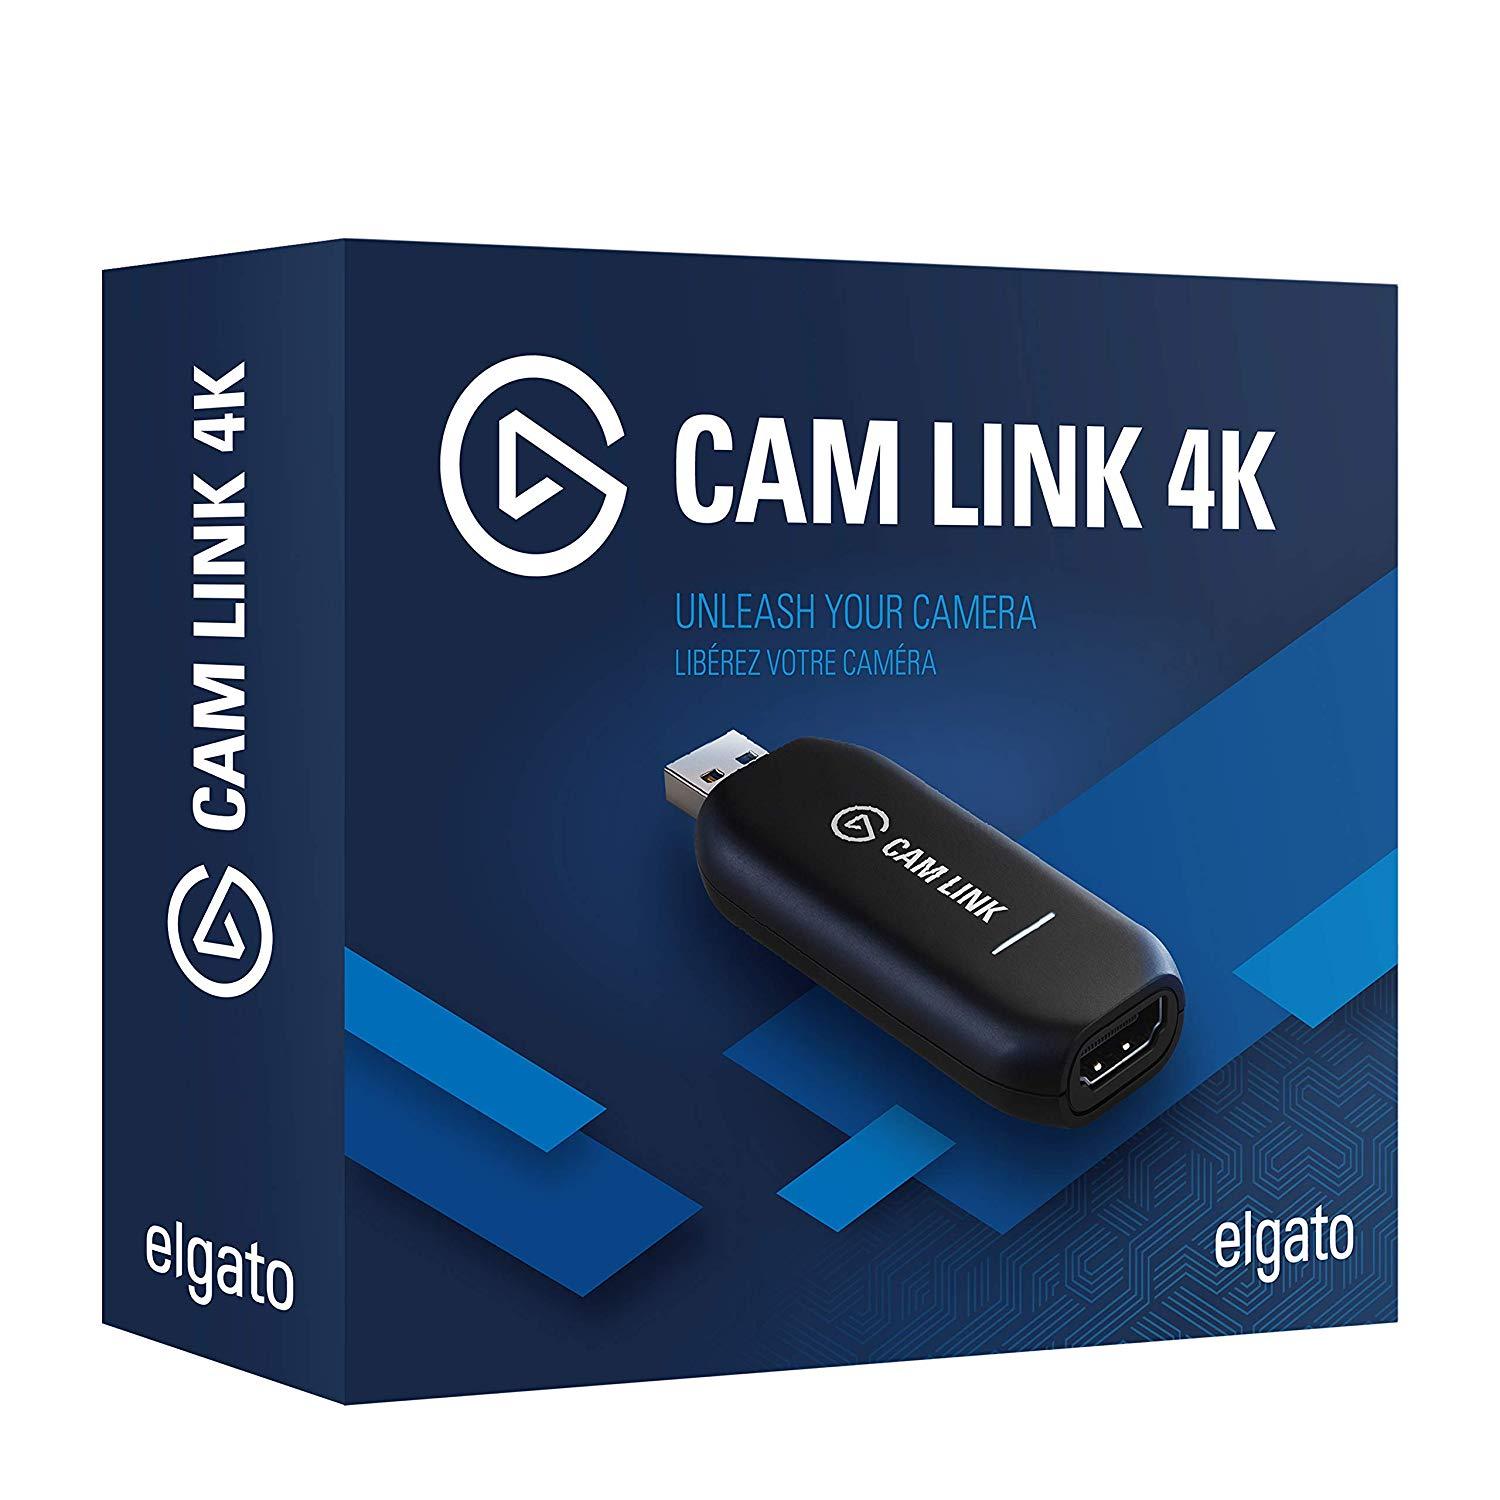 Elgato Cam Link Shop Elgato Cam Link With Great Discounts And Prices Online Lazada Philippines